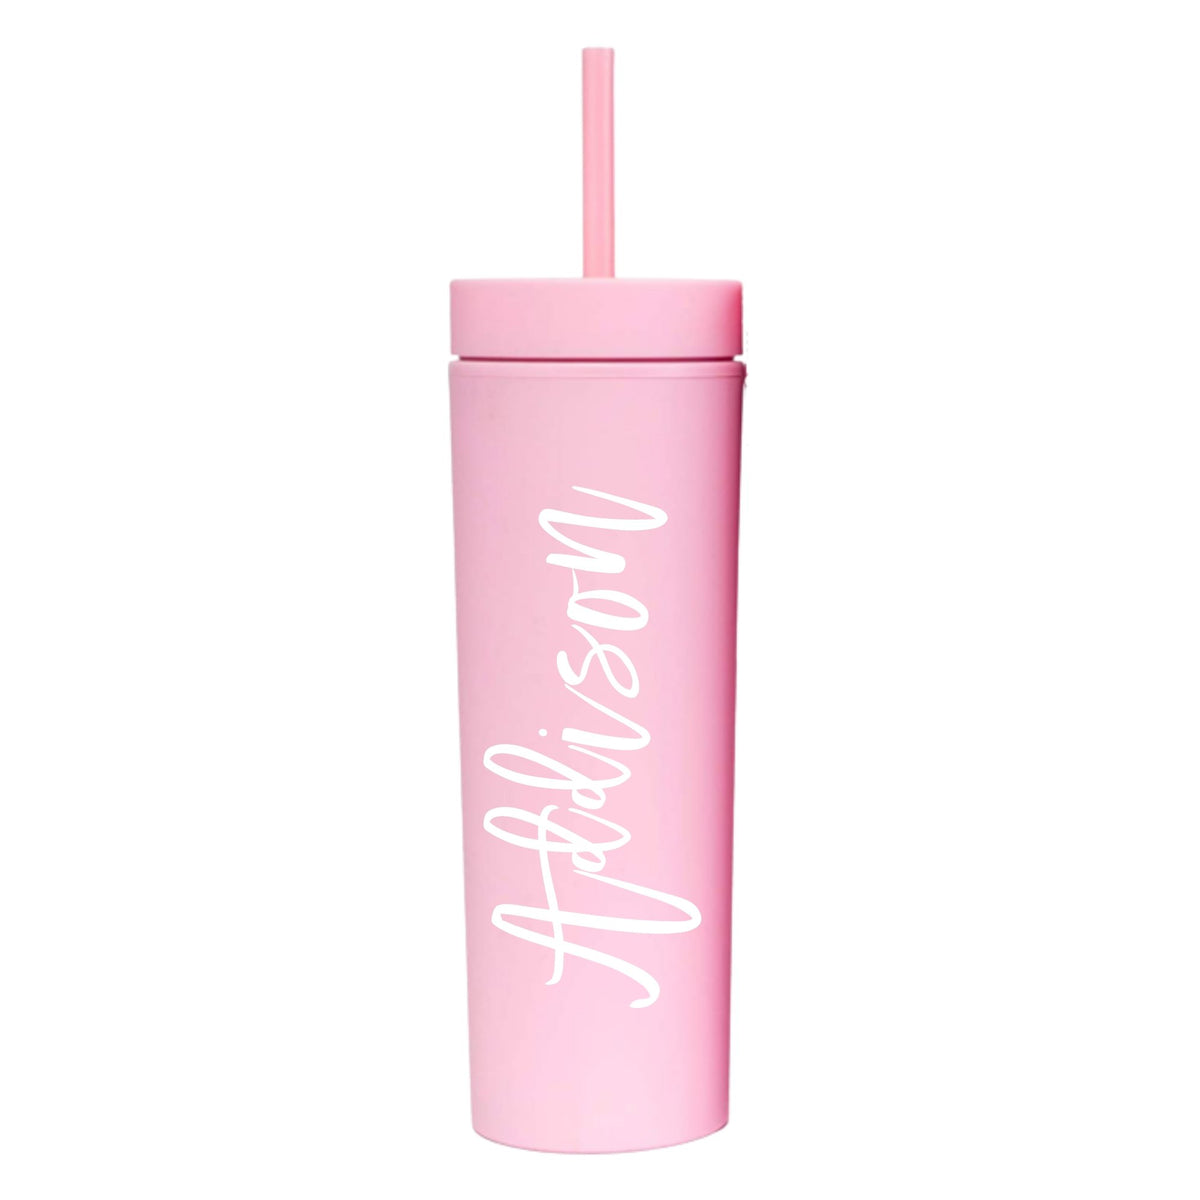 Ezhydrate SKINNY TUMBLERS (4 pack) LIGHT PINK- 16oz Matte Pastel Colored  Acrylic Tumblers with Lids …See more Ezhydrate SKINNY TUMBLERS (4 pack)  LIGHT